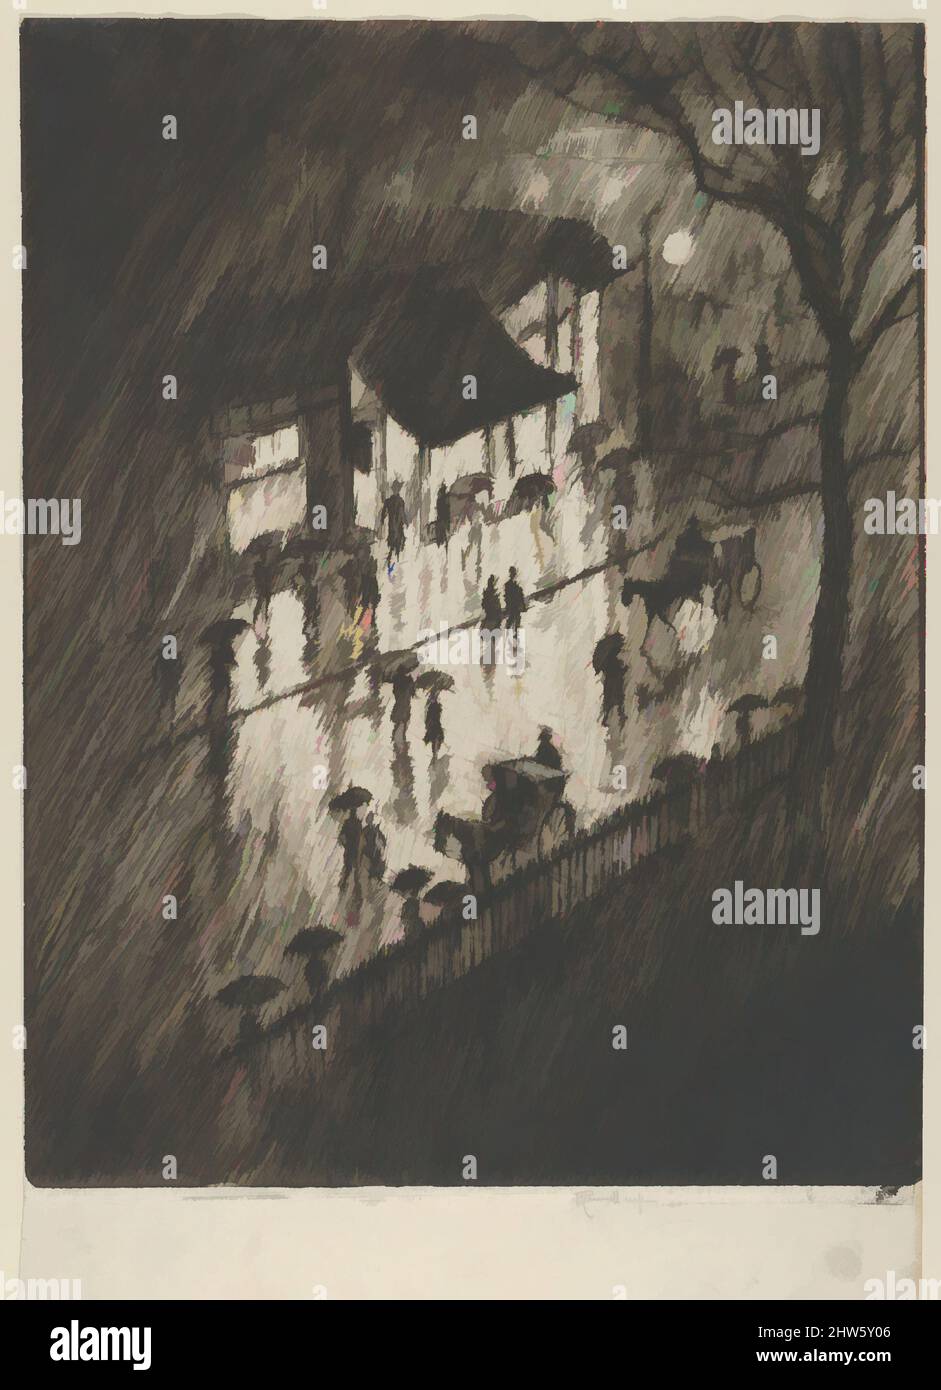 Art inspired by Rainy Night, Charing Cross Shops, 1903, Etching, plate: 10 3/4 x 8 3/8 in. (27.3 x 21.3 cm), Prints, Joseph Pennell (American, Philadelphia, Pennsylvania 1857–1926 New York), Pennell, a Philadelphia-born Quaker, spent the first two decades of his career abroad, living, Classic works modernized by Artotop with a splash of modernity. Shapes, color and value, eye-catching visual impact on art. Emotions through freedom of artworks in a contemporary way. A timeless message pursuing a wildly creative new direction. Artists turning to the digital medium and creating the Artotop NFT Stock Photo